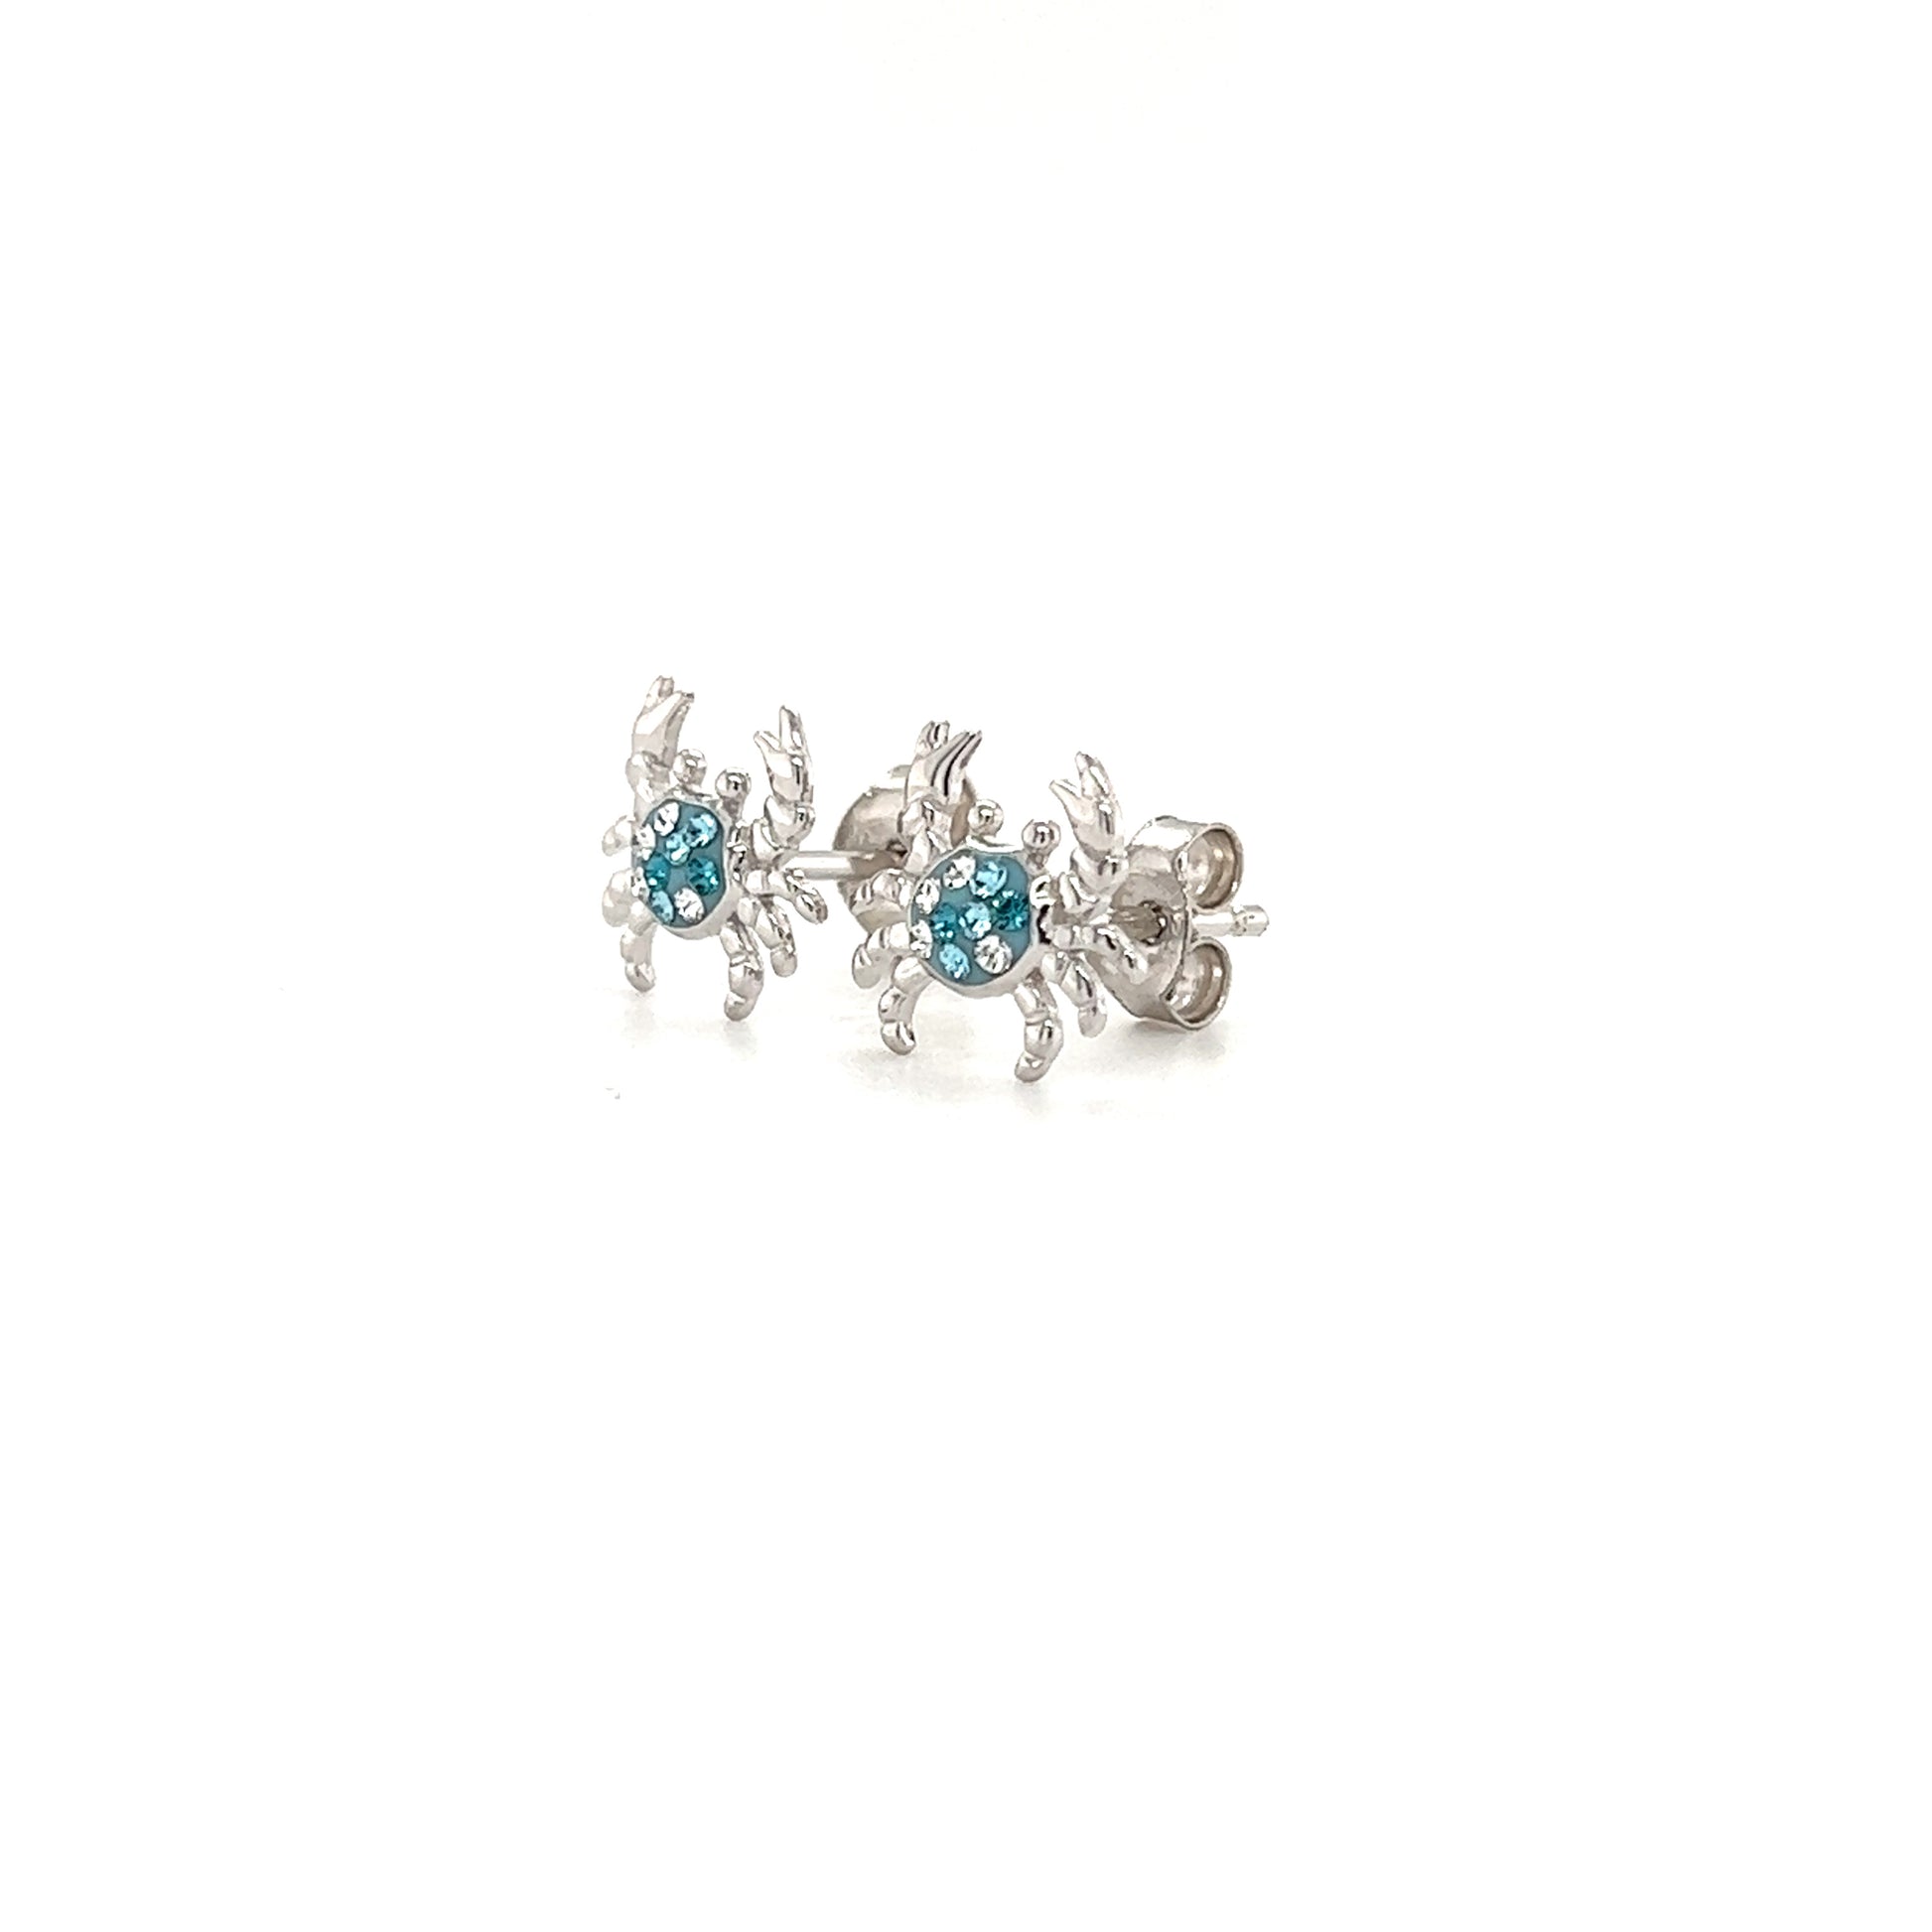 Blue Crab Stud Earrings with Aqua and White Crystals in Sterling Silver Right Side View